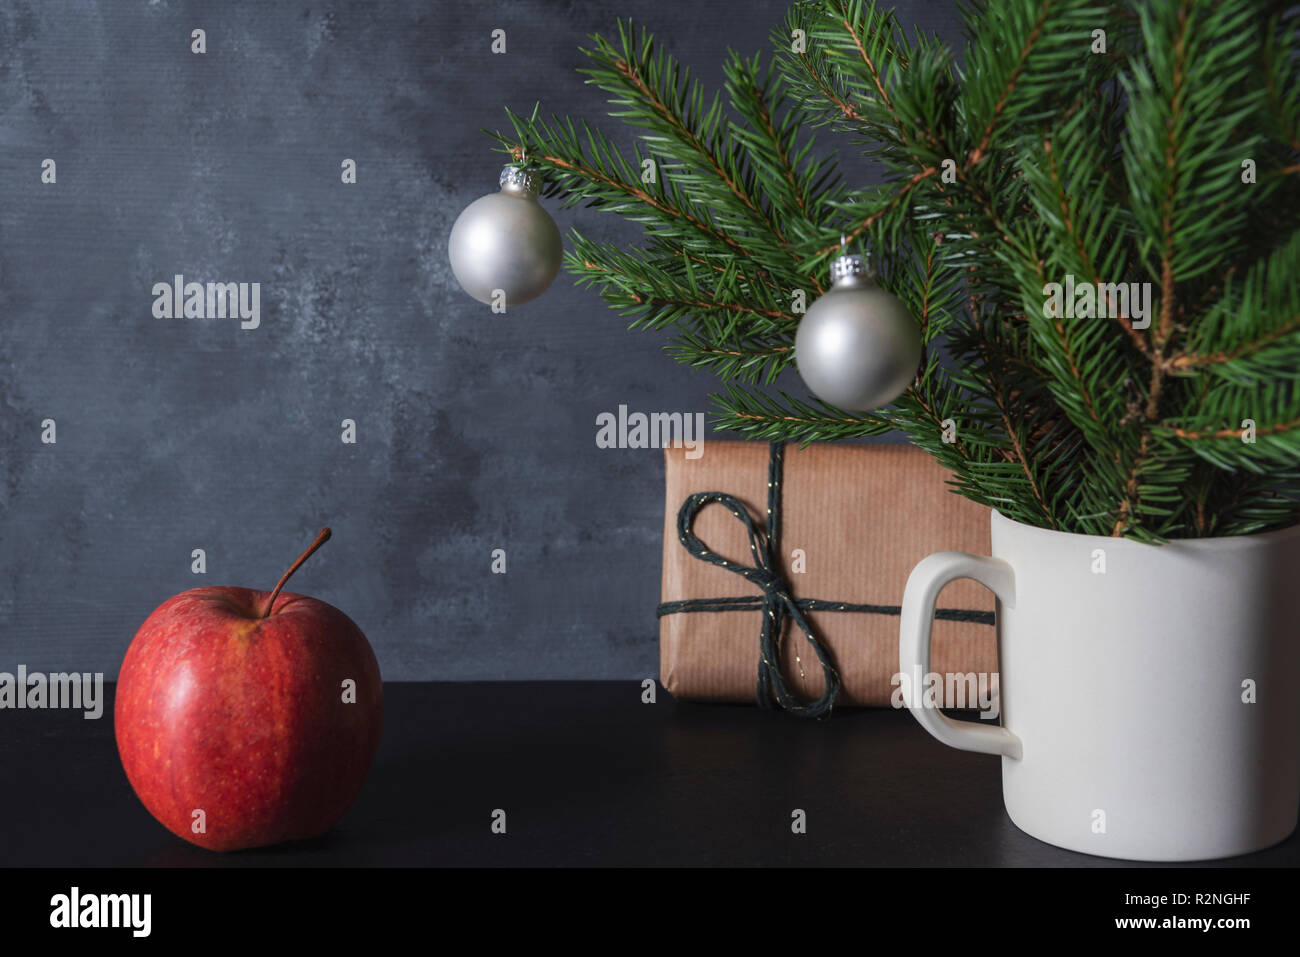 Red apple on a table near a cup with pine branches in it and Xmas balls and a gift box. Christmas frame. Xmas tradition. Winter holidays context. Stock Photo